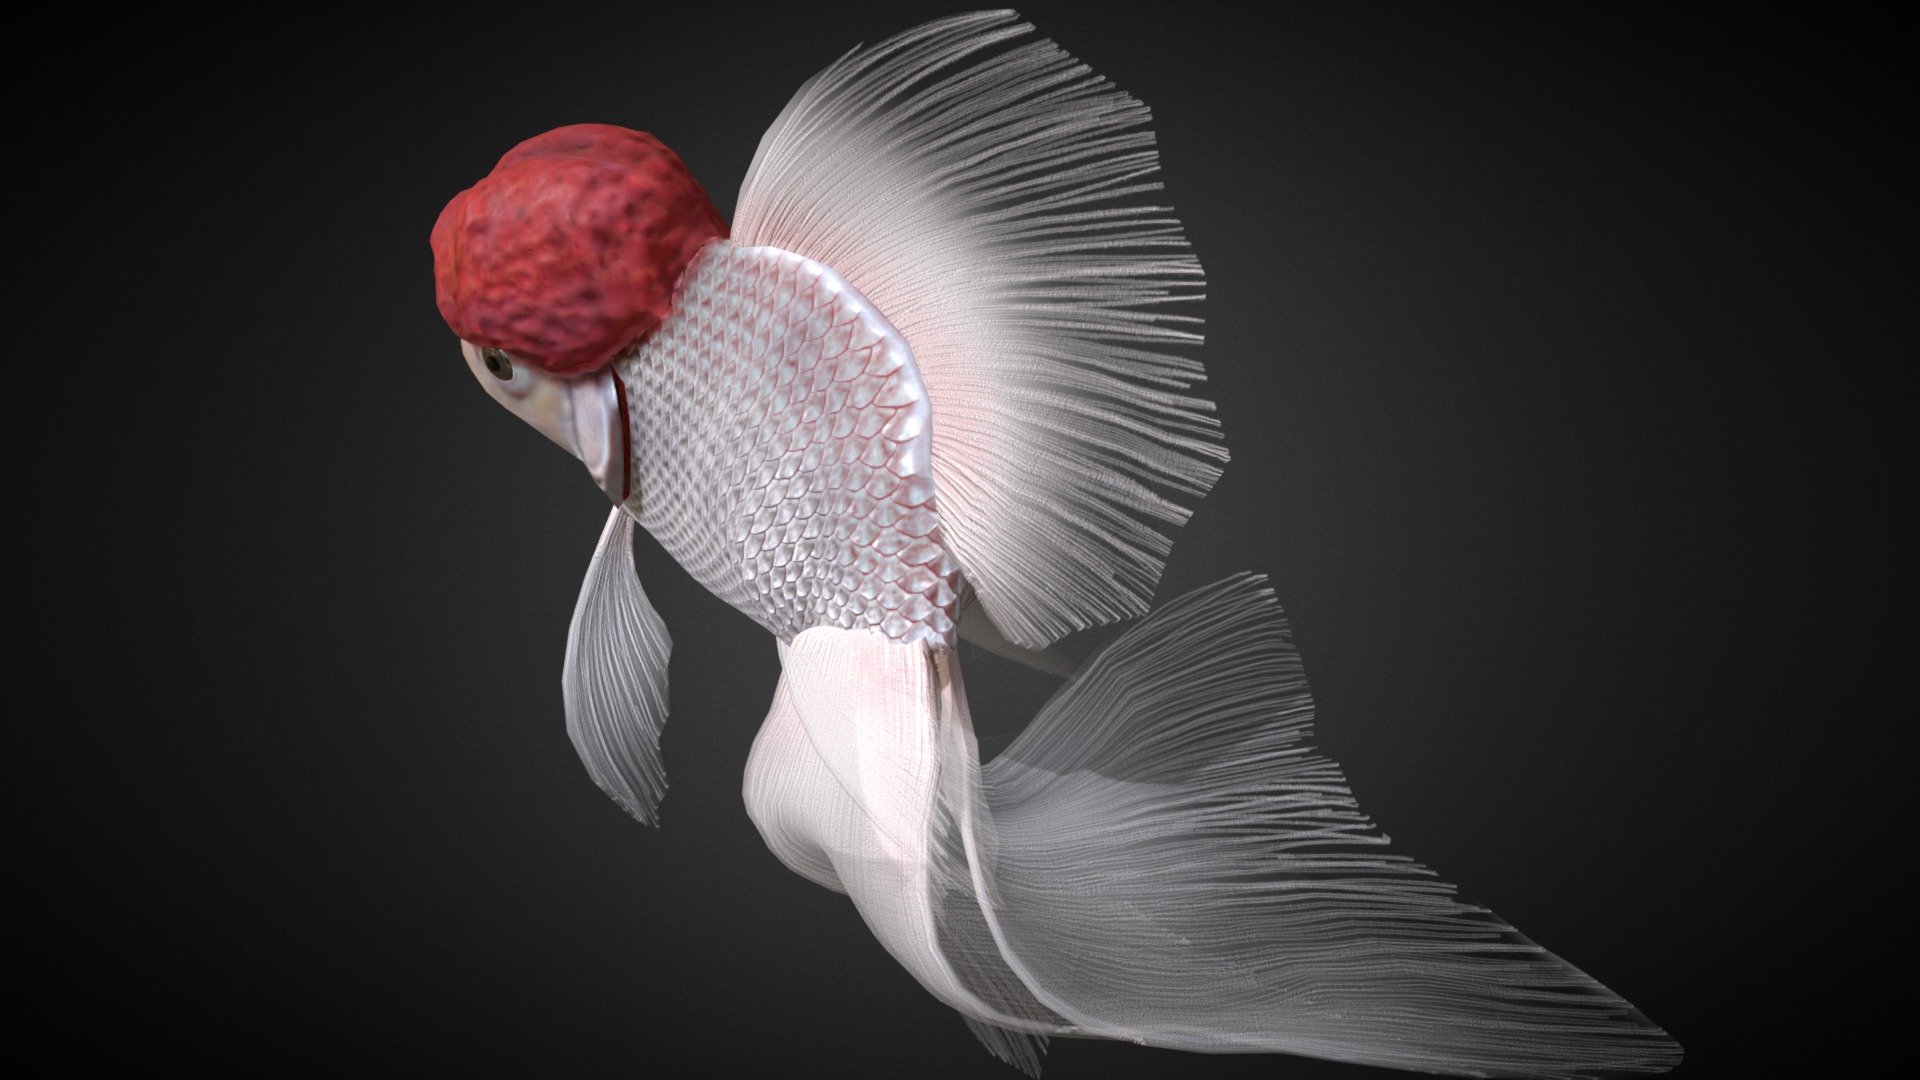 Fully textured and rigged Redcap Oranda goldfish model with sample animation.

Redcap Oranda as the name suggests is a breed of goldfish with silver body and red wen which resembles a cap attached to its head.  Known as Tancho goldfish in Japan, this breed and rest of Oranda goldfishes actually have nothing to do with the country of Netherlands (Holland, where the word Oranda came from).

So I wanted to show off the long transparent fins, resulting in the rear view sexy shot for thumbnail.  Please spin it around to also see its cute wen covered face!


Sculpting, modeling, rigging, animation done in Blender
Texturing done in Substance Painter

All C&amp;C are welcome!  Let me know what you think! - Redcap Oranda goldfish - Download Free 3D model by somitsu 3d model